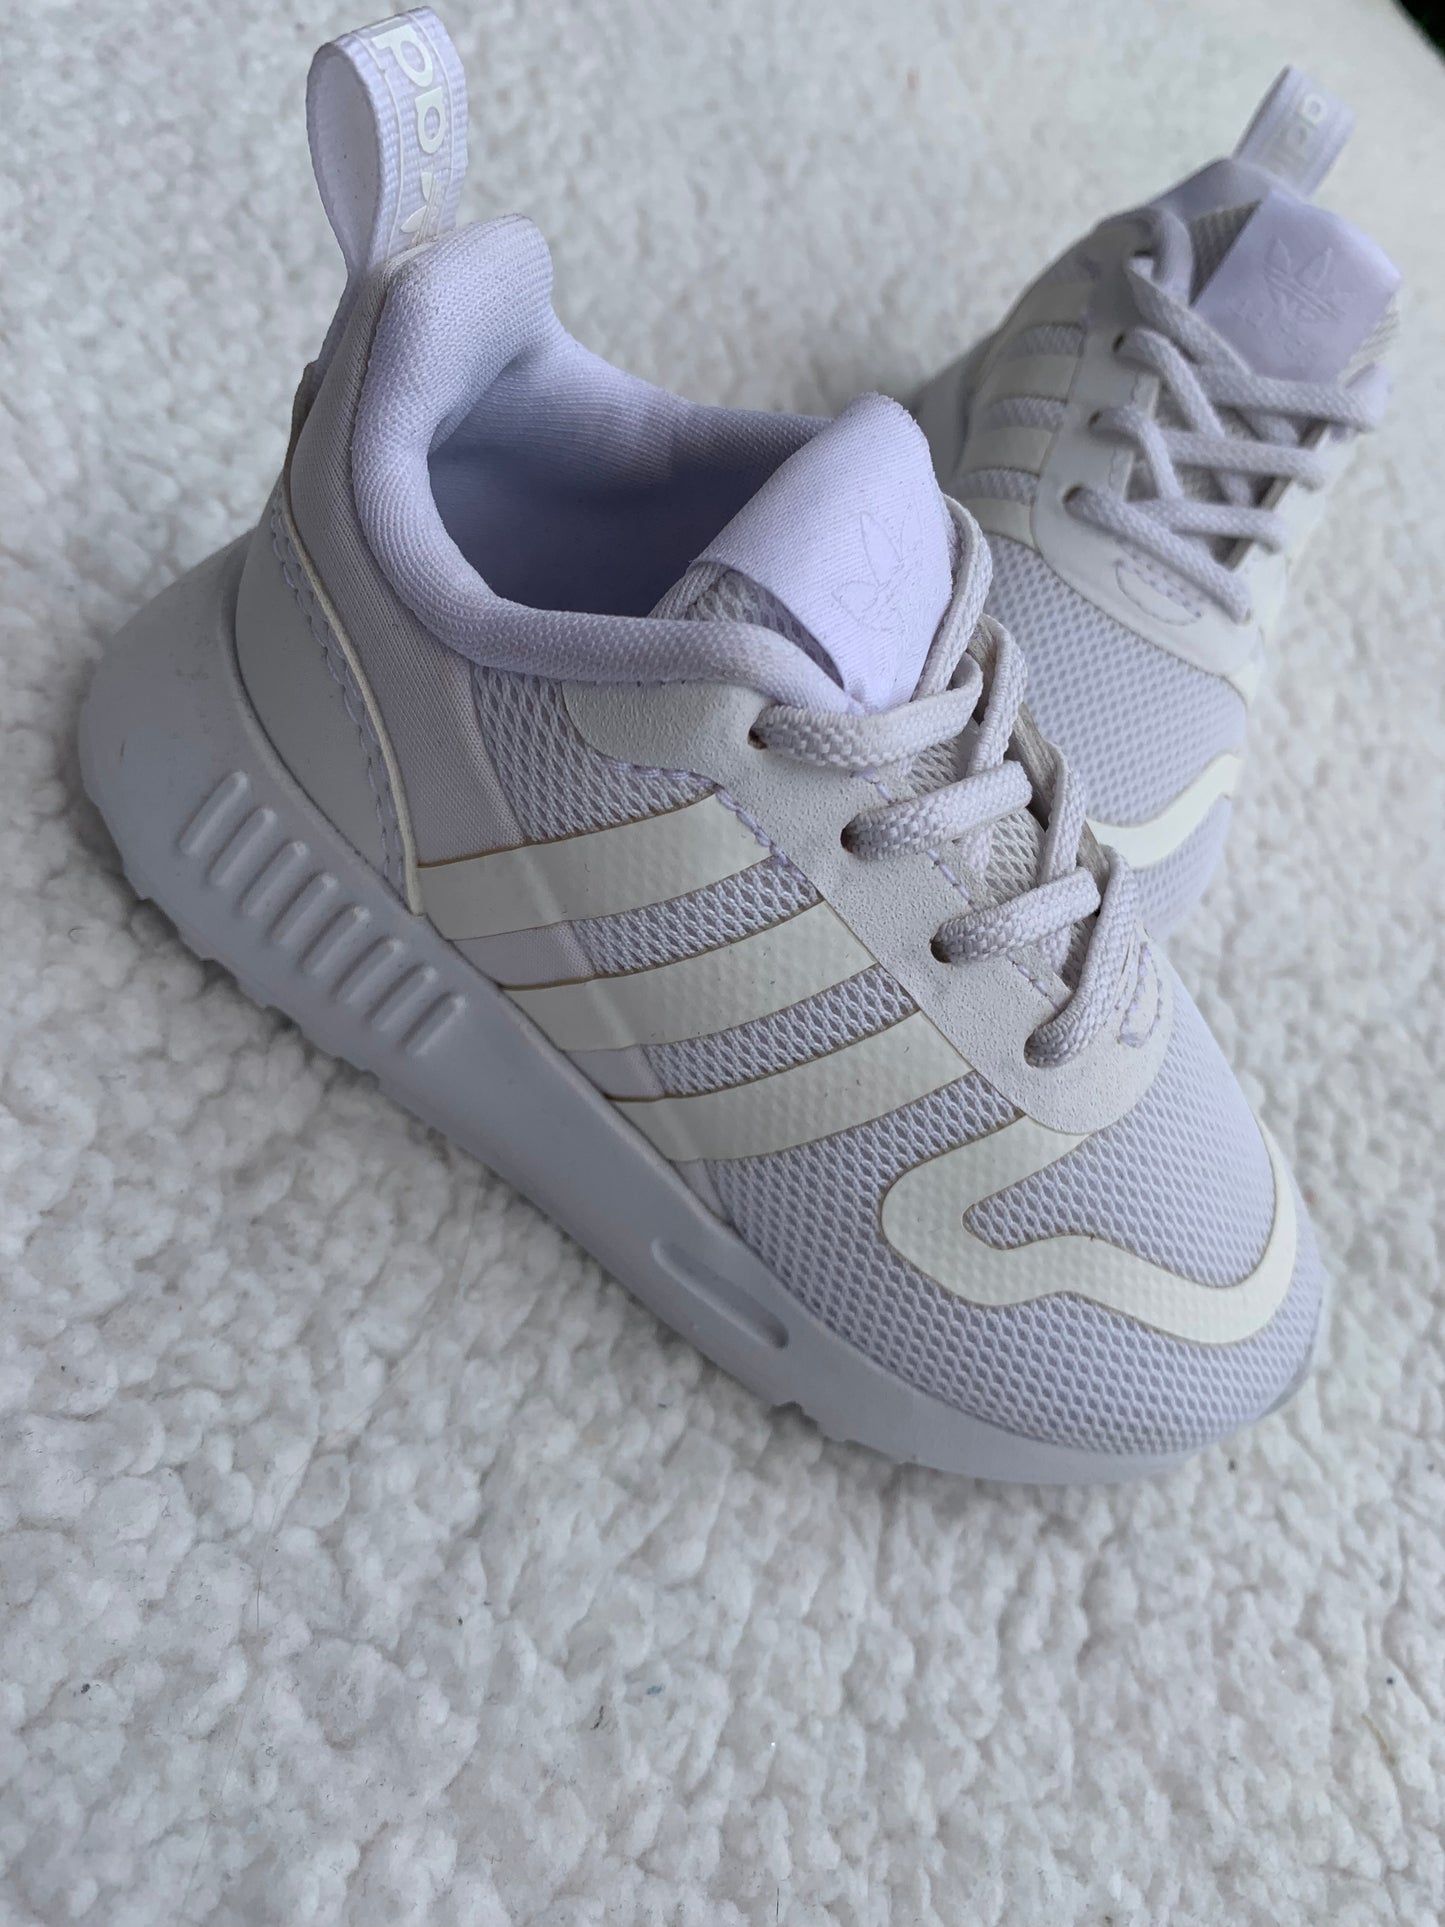 Adidas sneakers for kids